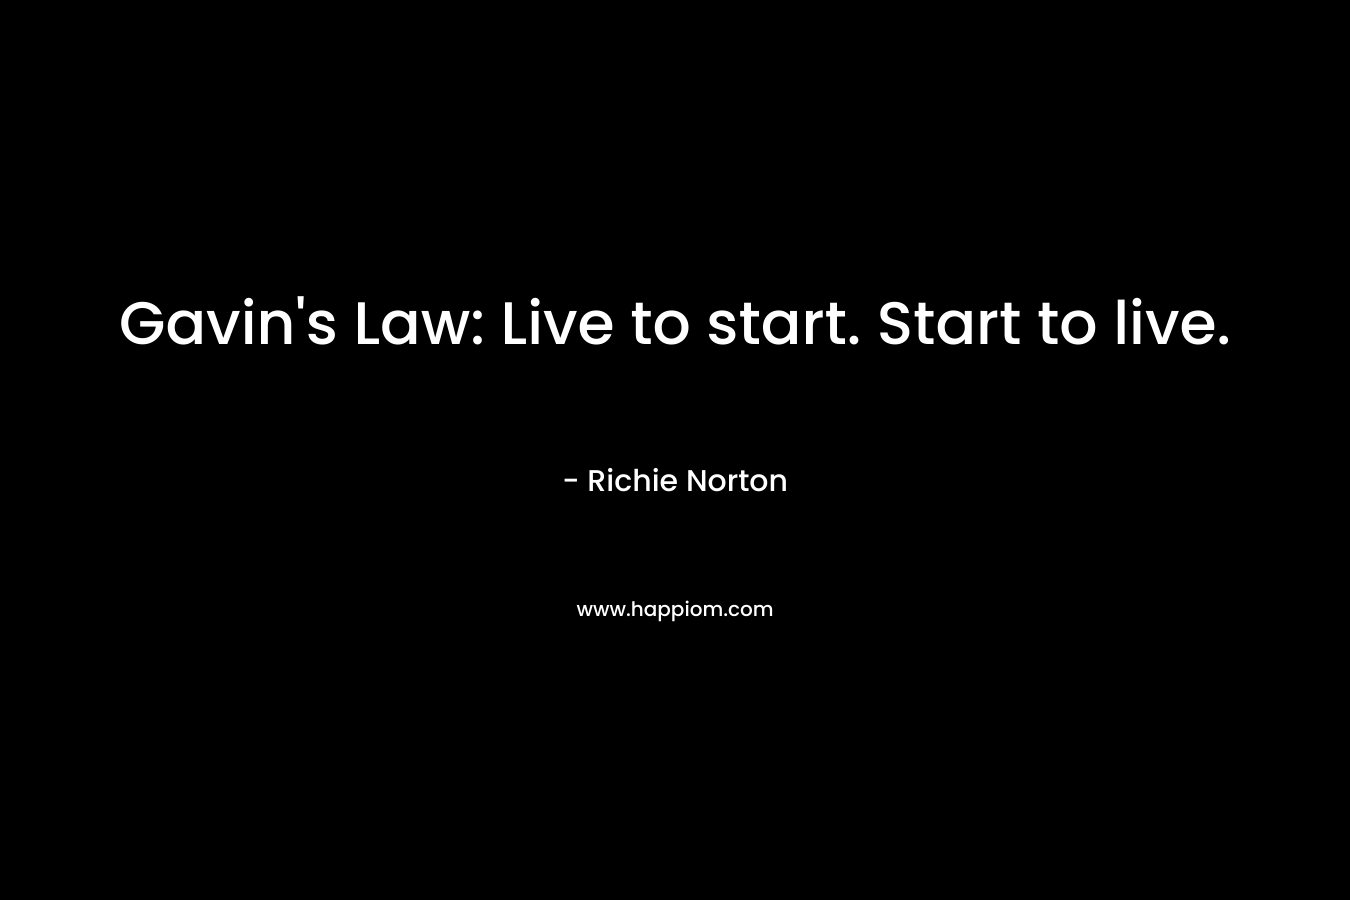 Gavin's Law: Live to start. Start to live.